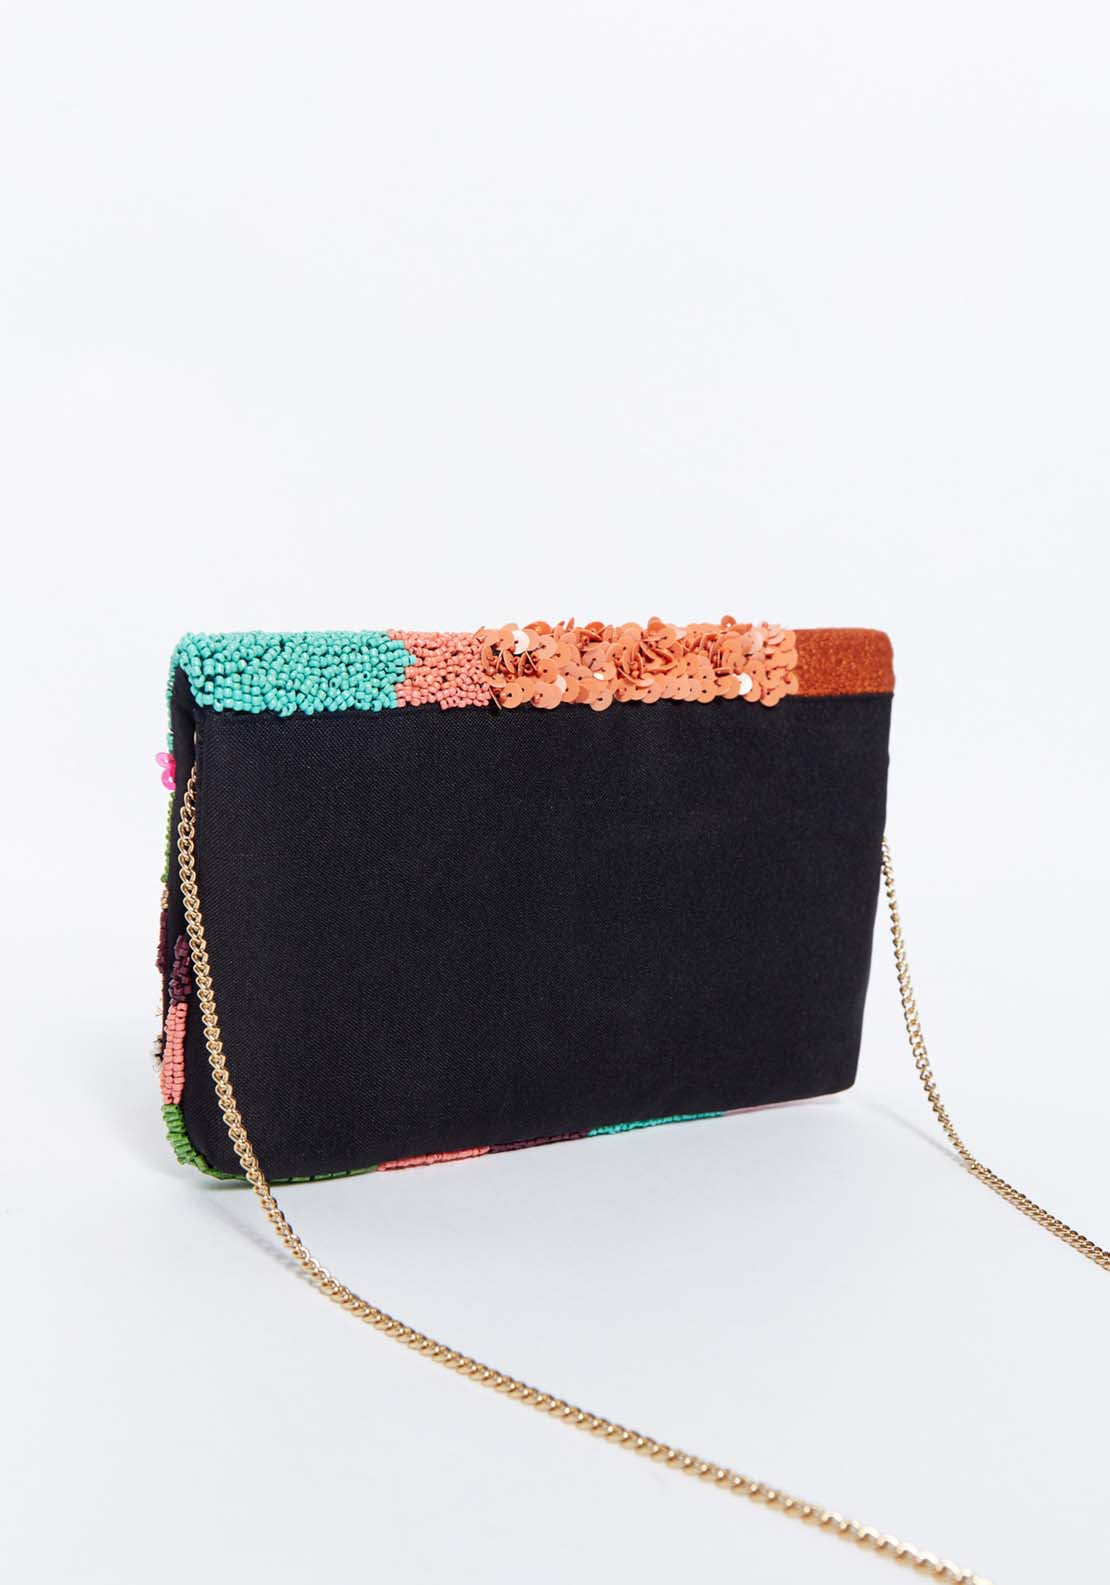 Sfera Beads clutch bag 3 Shaws Department Stores